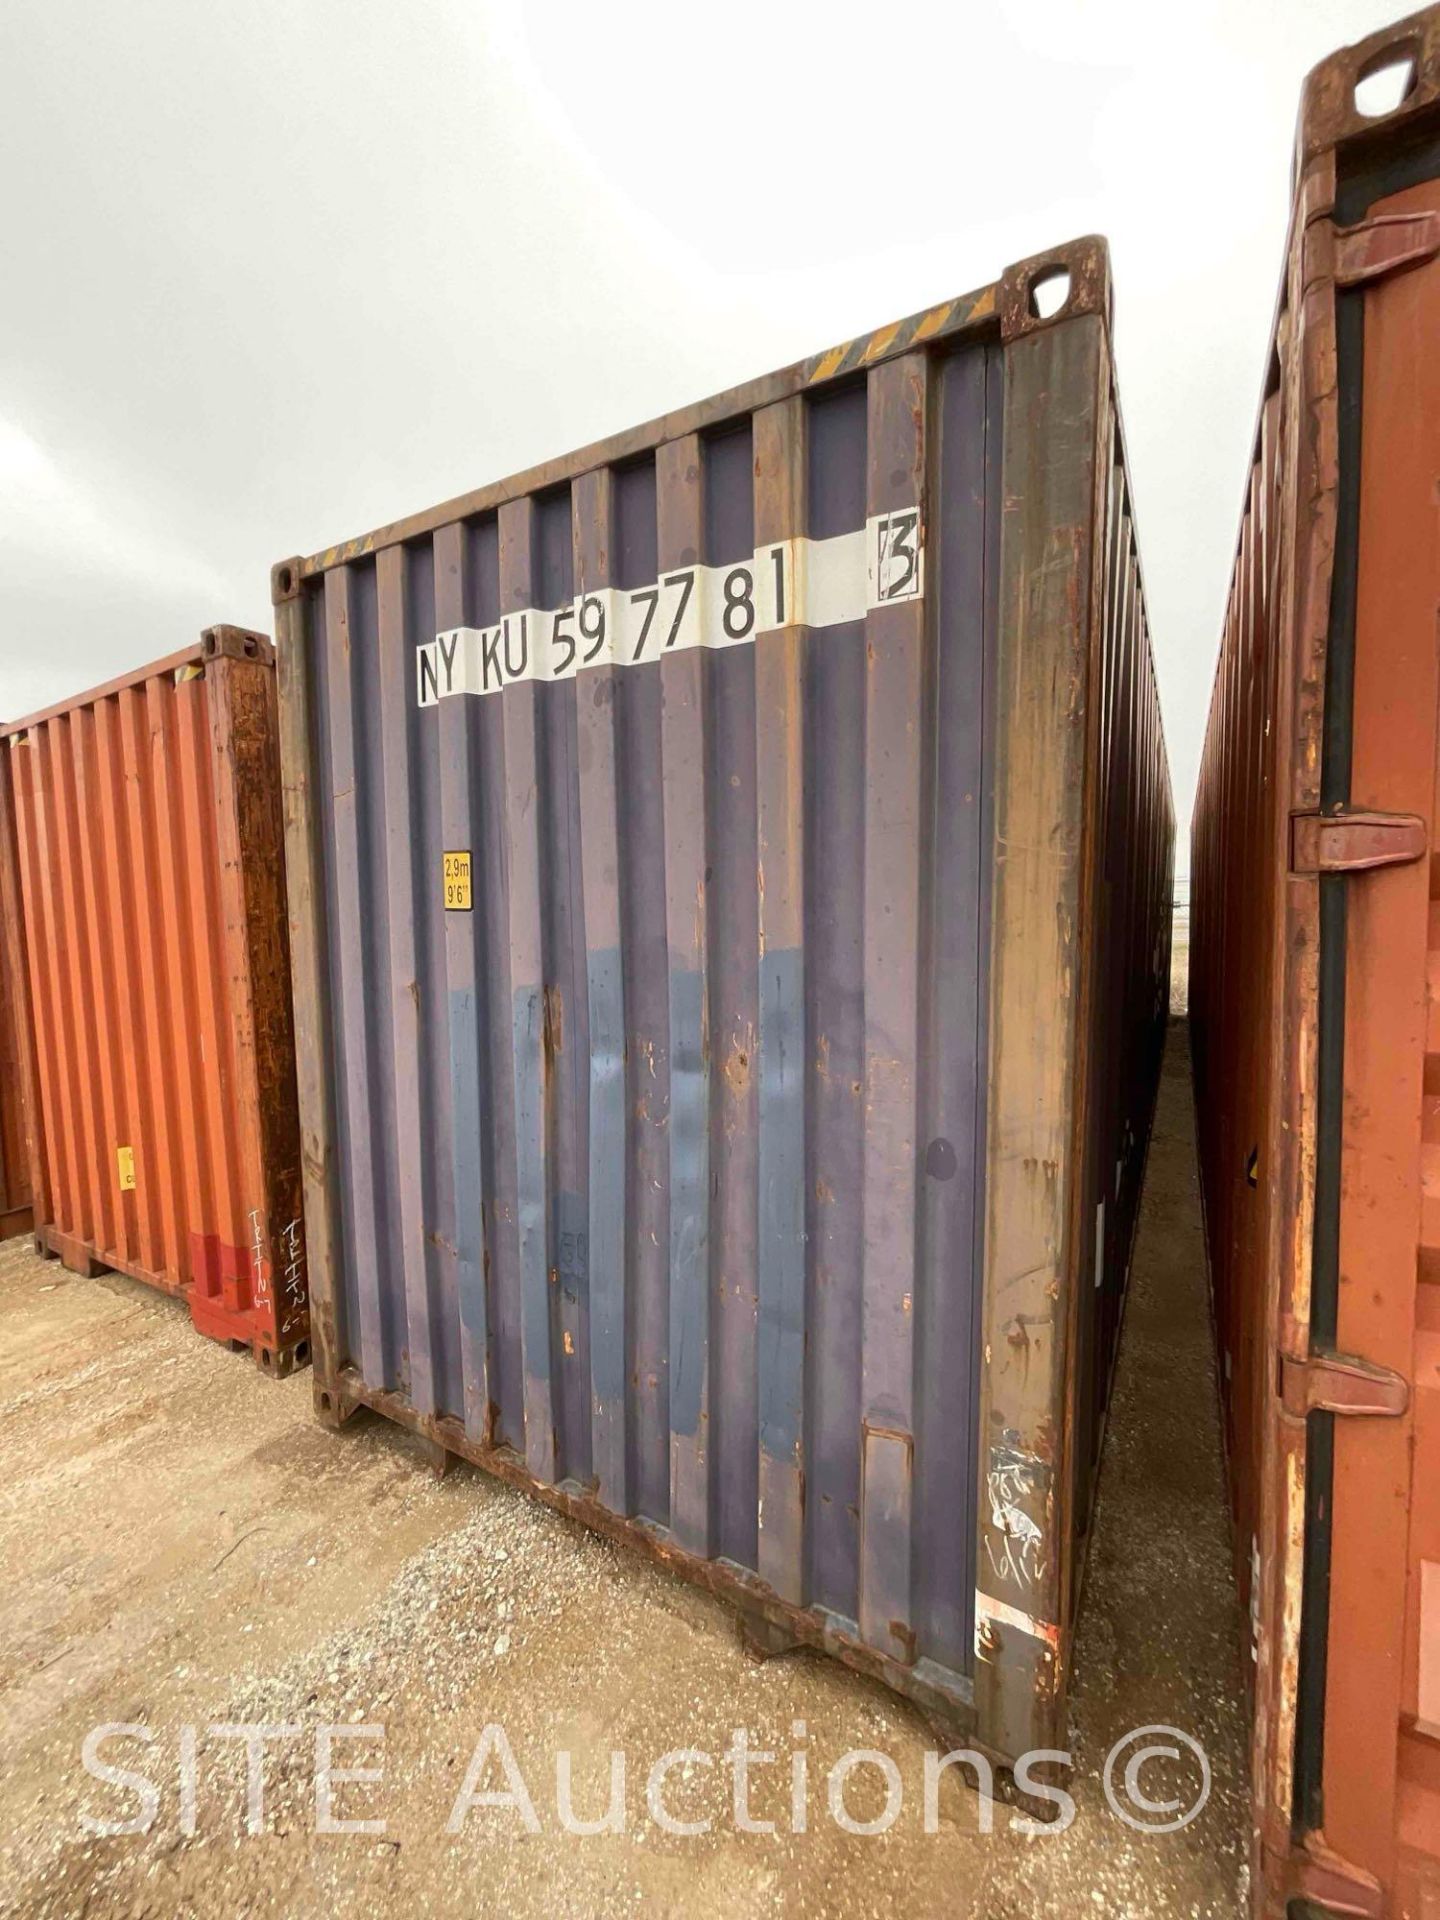 Huizhou 40ft. Shipping Container - Image 8 of 8